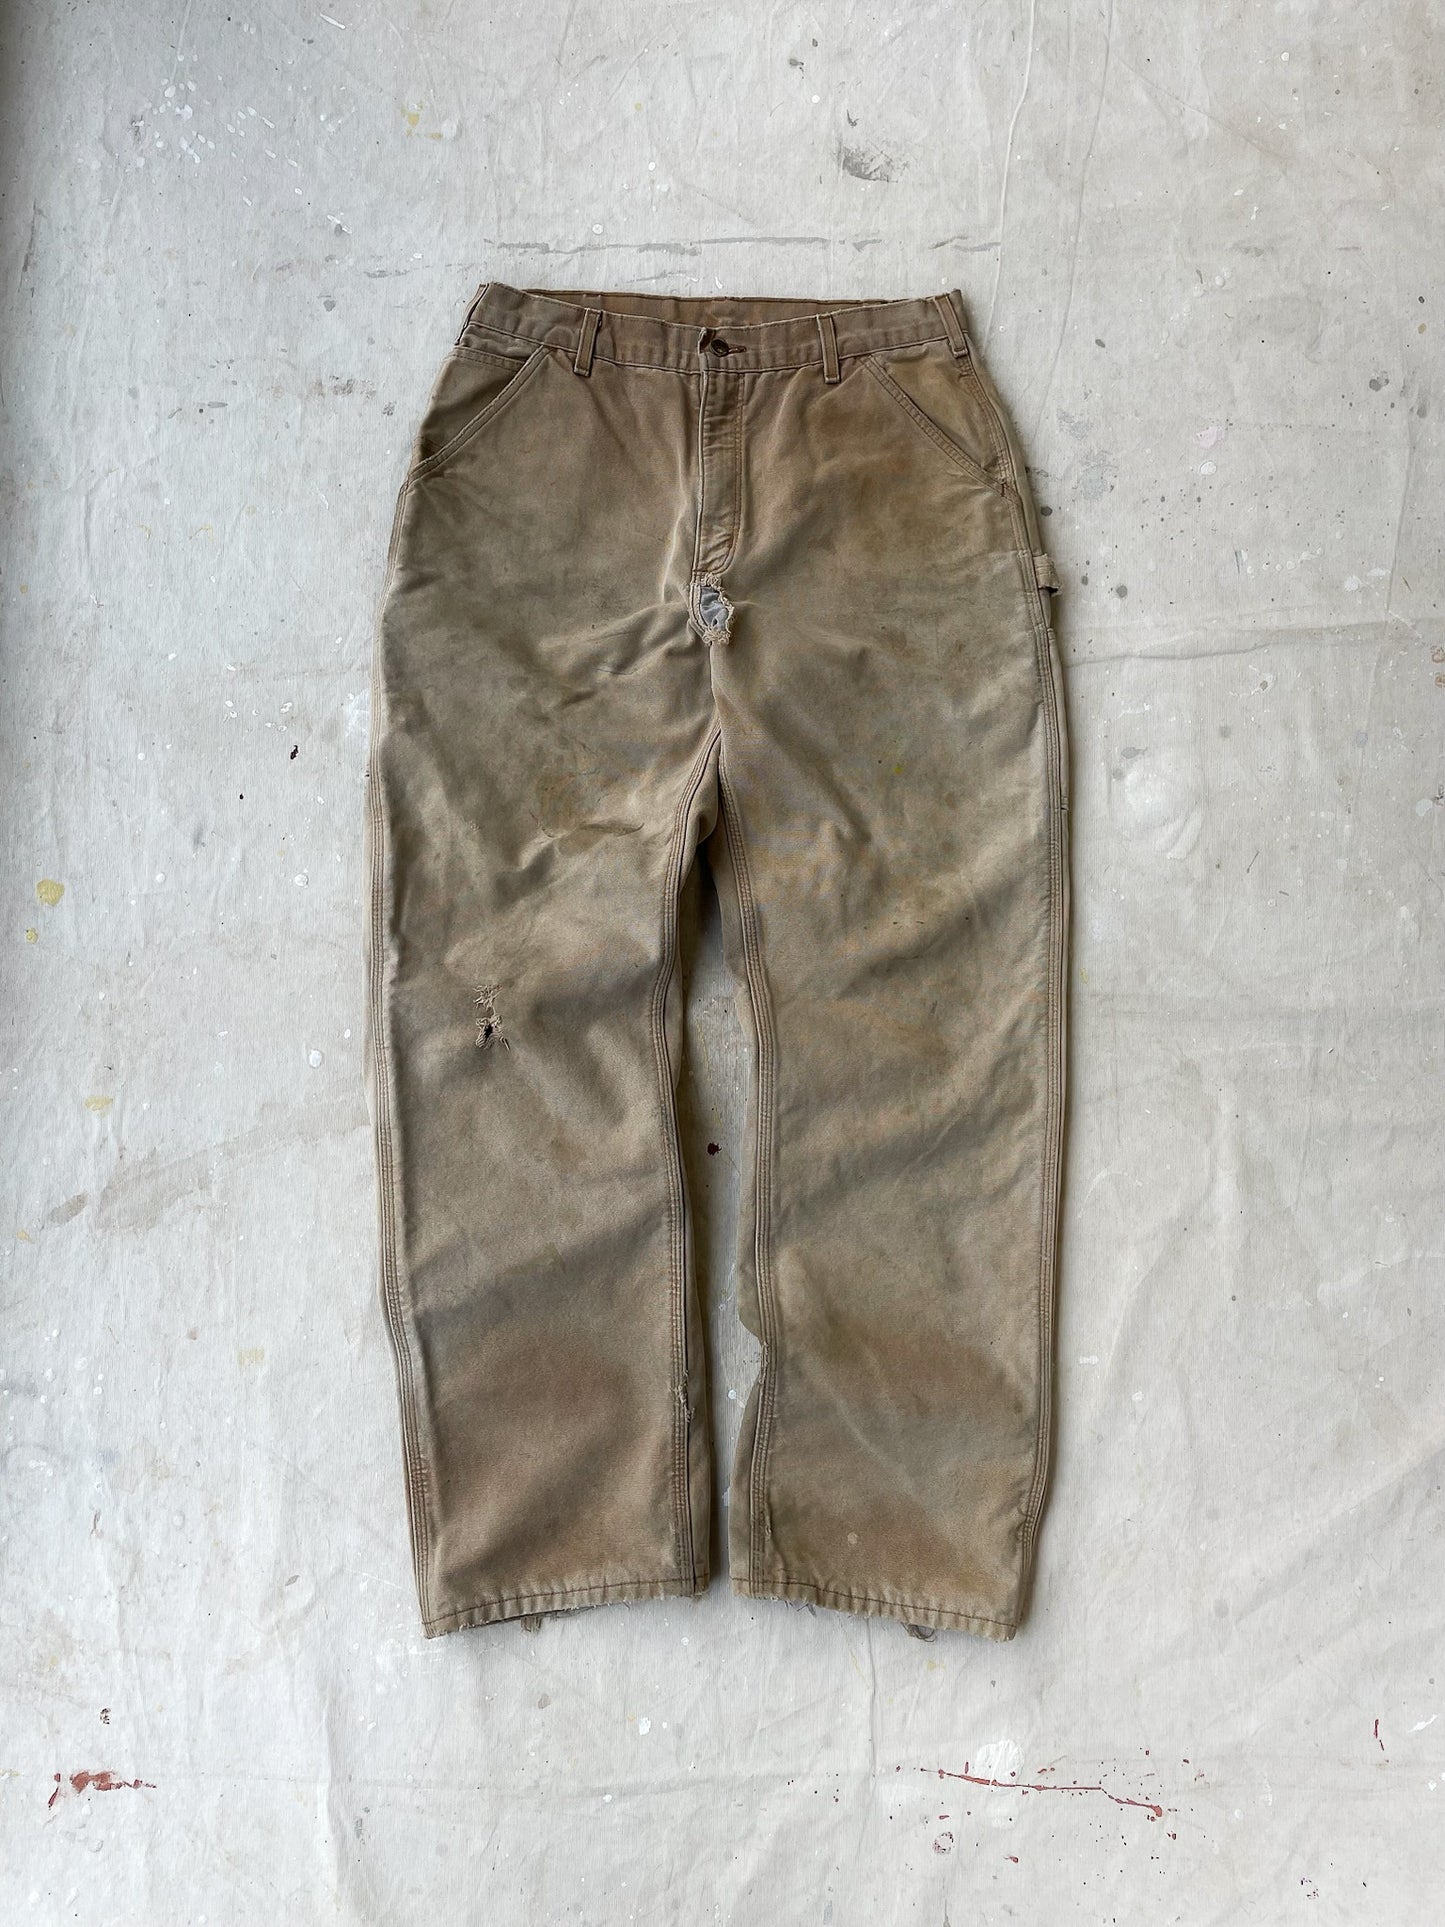 Carhartt Flannel Lined Pants—[36x34]